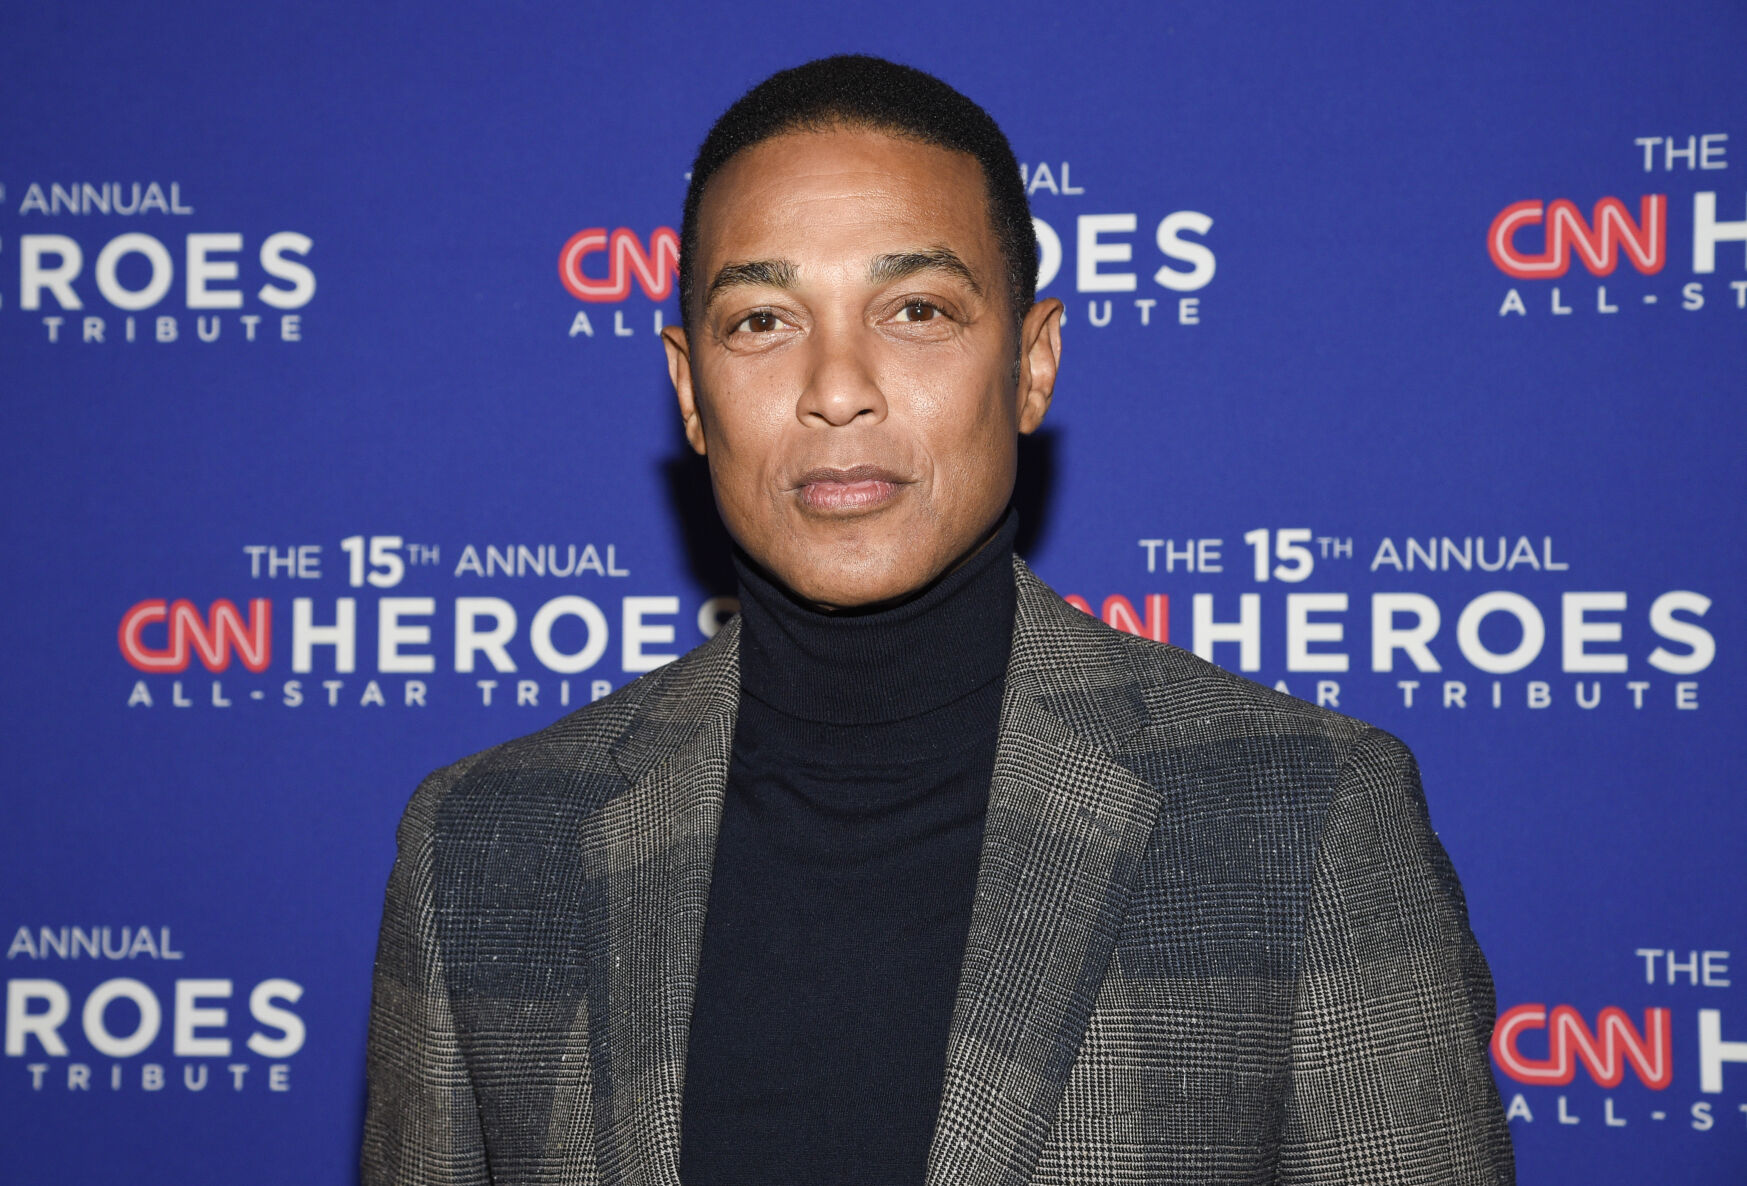 <p>FILE - Don Lemon attends the 15th annual CNN Heroes All-Star Tribute at the American Museum of Natural History on Sunday, Dec. 12, 2021, in New York. (Photo by Evan Agostini/Invision/AP, File)</p>   PHOTO CREDIT: Evan Agostini - invision linkable, Invision